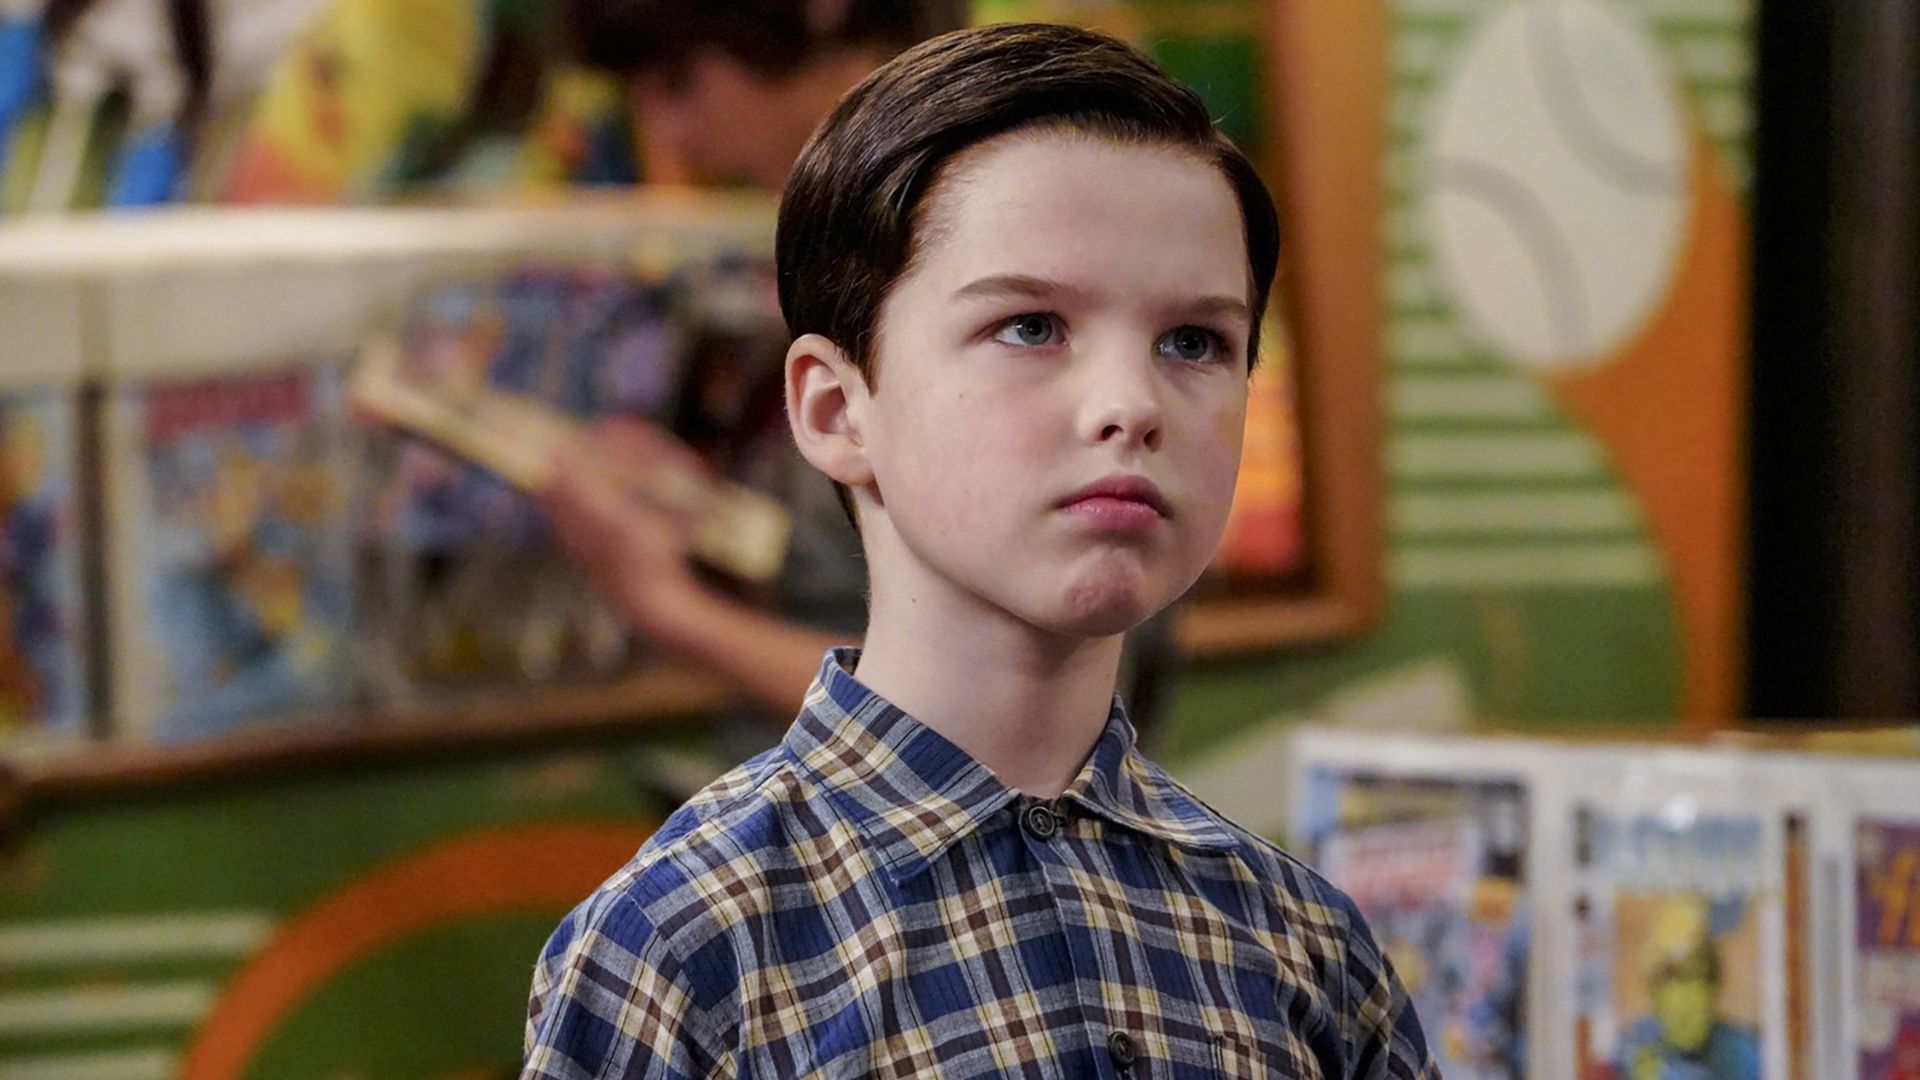 Iain Armitage in the series 'Young Sheldon'